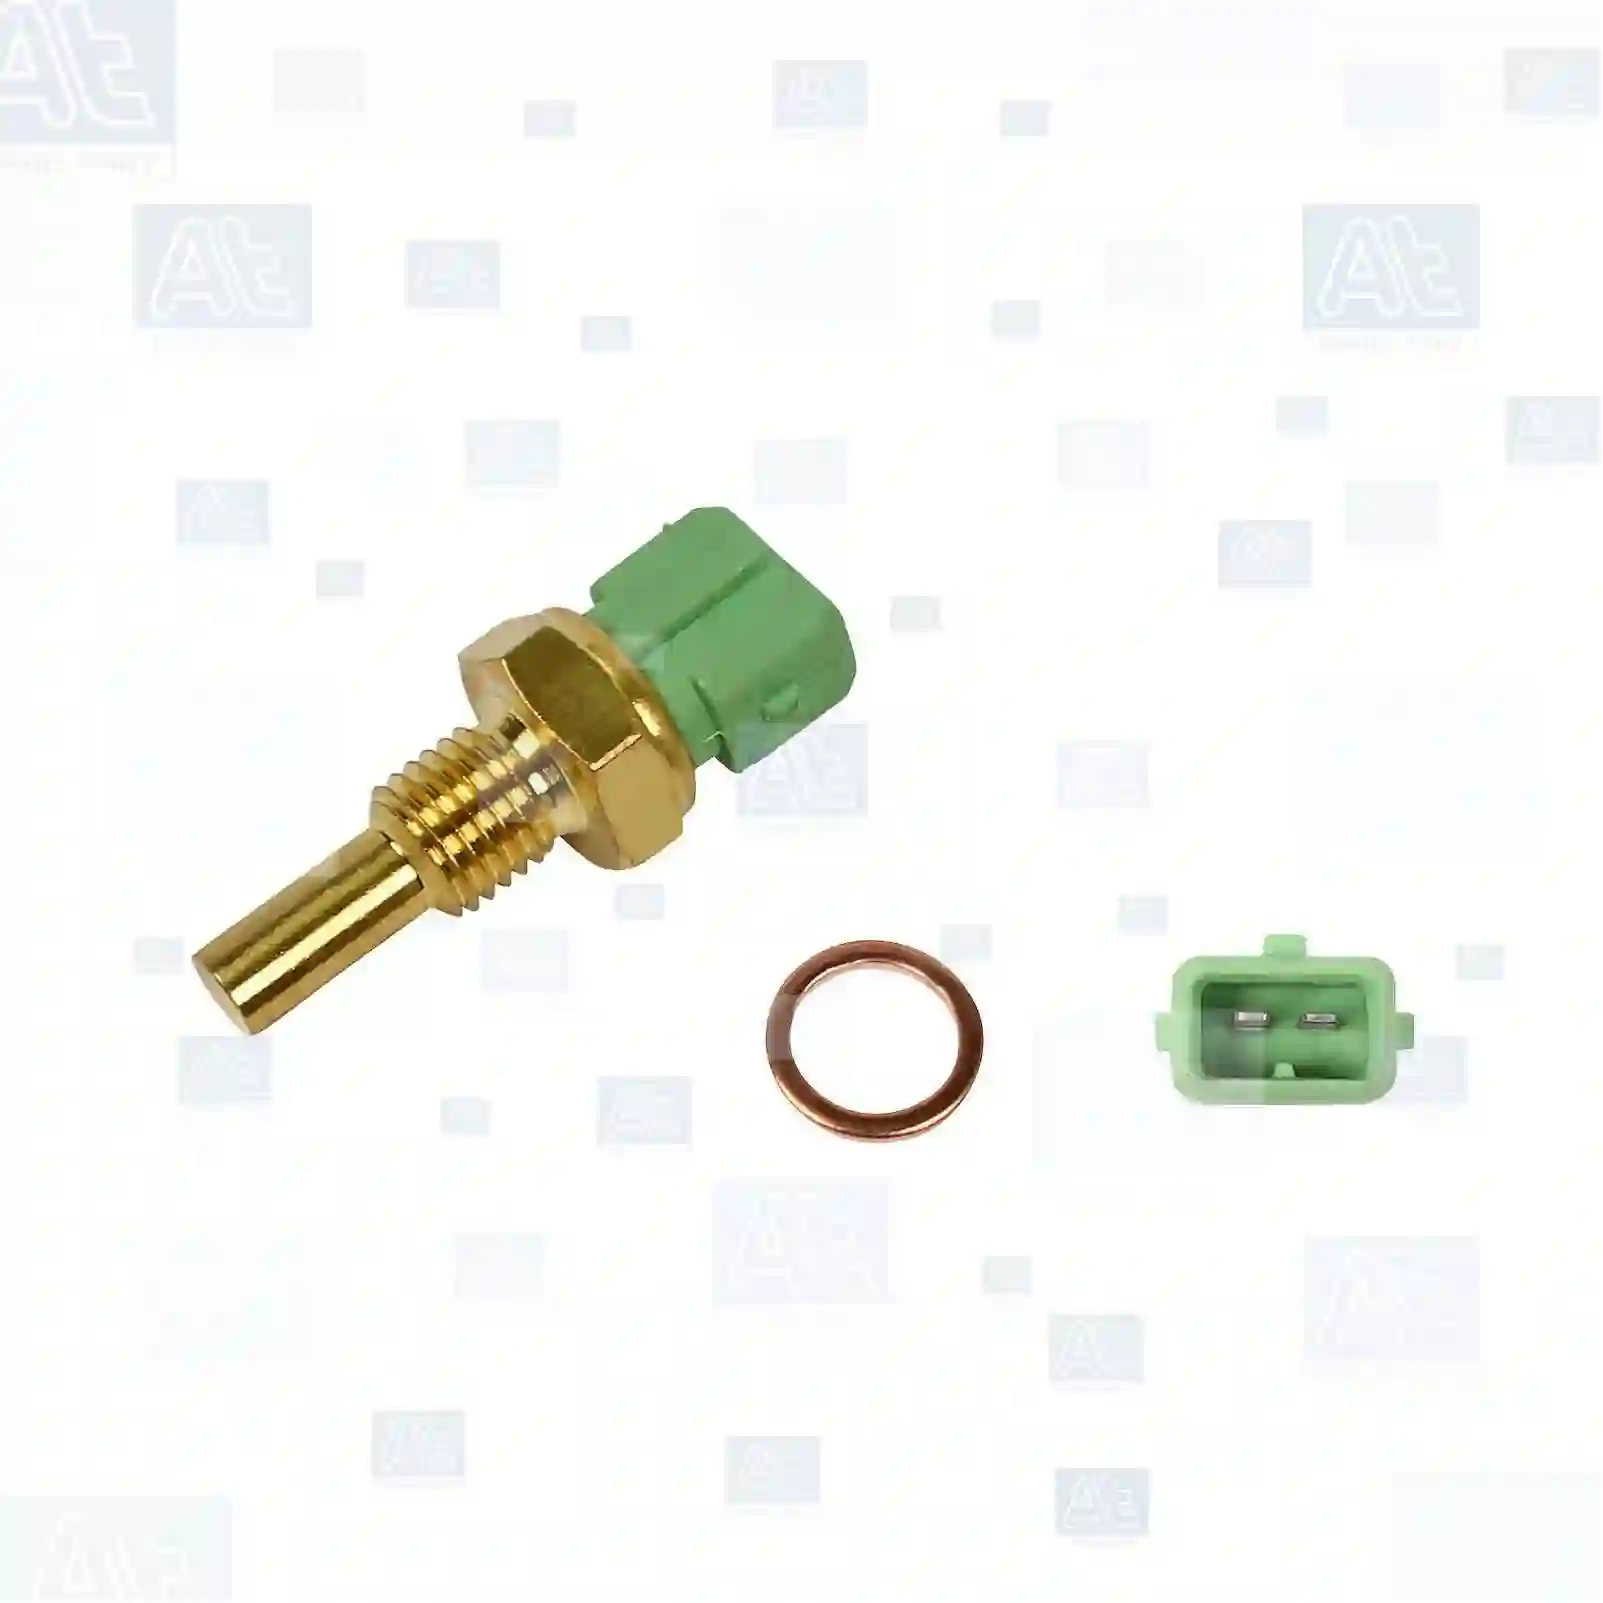 Cooling System Temperature sensor, at no: 77707155 ,  oem no:04393601, 04850371, 05972332, 07547977, 07695581, 07738223, 07770239, 09946866, 11911110100, 119111101000, 1953211010, 195321101000, 1953211010000, 46125769, 46477022, 605132050, 605233830, 60513205, 60523383, 60528383, 60800167, 60806379, 60808142, 60813751, 98424793, 820004, 004435008, 004435010, 025906041, 6U0919501, UE71610, 1284397, 1357414, 1401945, 1709966, 1709967, 13621284397, 13621357414, 13621401945, 13621709966, 13621709967, 13622242184, 90080939, 9160301, 45962029F, 00001338A5, 024246, 133857, 1338A5, 19203F, 0280130026, 39389002, 125380, 125769, 172750, 46477022, 4850371, 5972332, 60808142, 7547977, 7695581, 7770239, 98424793, 04393601, 04850371, 05972332, 06081220, 06081224, 07547977, 07695581, 07702239, 07738223, 07770239, 09946866, 30523666, 46125769, 46477022, 50009755, 5972332, 605132050, 605233830, 60513205, 60523383, 60528383, 60800167, 60806379, 60808142, 60813751, 98424793, 1207003, 1639283, 1957002, 1C1R-7H141-AA, 7072695, 94720065561, 1338444, 1338451, 1338458, 1338548, 30523666, 6238317, 90018835, 90080039, 90080939, 90410192, 90410792, 90411977, 90487859, 90510183, 9160301, 92017805, 9275979, 93184580, 93358883, 94205866, 96060084, 30506984, 30523666, 8942058660, 90410792, 90411977, 92017805, 37870-P5T-G00, 37870-PDF-E00, 37870-PDF-E01, 39220-22000, 39220-22010, 11023V0700, 2263010G00, 22630G2402, 22630G2404, 22630N4200, 46477022, 5972332, 98424793, 8-94205866-0, 04393601, 04850371, 05972332, 07738223, 46477022, 5972332, 60808142, 98424793, DAC4737, UKC2525, 45962029F, 0K737-18840, 39220-22000, 39220-22010, 39220-22020, 00125769, 04393601, 04850371, 05972332, 07547977, 07695581, 07770239, 09946866, 119111101000, 195321101000, 46125769, 46477022, 605132050, 605233830, 60513205, 60523383, 60528383, 60800167, 60806379, 60808142, 60813751, 98424793, ERR2081, 0770034, 89422-05010, 89422-05020, 470079800, AW311467, 29729460, 11023-G7000, 11023-V0700, 22630-10G00, 22630-G2402, 22630-G2404, 22630-N4200, 22630-P8100, 1338443, 1338444, 1338451, 1338458, 1338541, 1342850, 1738451, 4416020, 4500001, 6238317, 8933631, 8983631, 00001338A5, 024246, 133857, 1338A5, 19203F, 92860612501, 94460612500, 9966062239A, 0770287460, 5001865578, 7700267388, 7700582688, 7702087460, UE71610, ERR2081, GTR204, 4503132, 4770228, 756356, 7563562, 90510183, 91514549, 935702, 9357021, 004435008, 004435010, 025906041, 6U0919501, 004435008, 004435010, 025906041, 6U0919501, 55450, 55506, 22630AA000, 13650-60B00, 13650-60B00-000, 13650-84101, 13650-84101-000, 9141454980, 9151454980, A51454980, 89422-05010, 89422-05020, 1306937, 13069370, 1332396, 13323960, 13323969, 004435008, 004435010, 025906041, 026906161, 6U0919501 At Spare Part | Engine, Accelerator Pedal, Camshaft, Connecting Rod, Crankcase, Crankshaft, Cylinder Head, Engine Suspension Mountings, Exhaust Manifold, Exhaust Gas Recirculation, Filter Kits, Flywheel Housing, General Overhaul Kits, Engine, Intake Manifold, Oil Cleaner, Oil Cooler, Oil Filter, Oil Pump, Oil Sump, Piston & Liner, Sensor & Switch, Timing Case, Turbocharger, Cooling System, Belt Tensioner, Coolant Filter, Coolant Pipe, Corrosion Prevention Agent, Drive, Expansion Tank, Fan, Intercooler, Monitors & Gauges, Radiator, Thermostat, V-Belt / Timing belt, Water Pump, Fuel System, Electronical Injector Unit, Feed Pump, Fuel Filter, cpl., Fuel Gauge Sender,  Fuel Line, Fuel Pump, Fuel Tank, Injection Line Kit, Injection Pump, Exhaust System, Clutch & Pedal, Gearbox, Propeller Shaft, Axles, Brake System, Hubs & Wheels, Suspension, Leaf Spring, Universal Parts / Accessories, Steering, Electrical System, Cabin